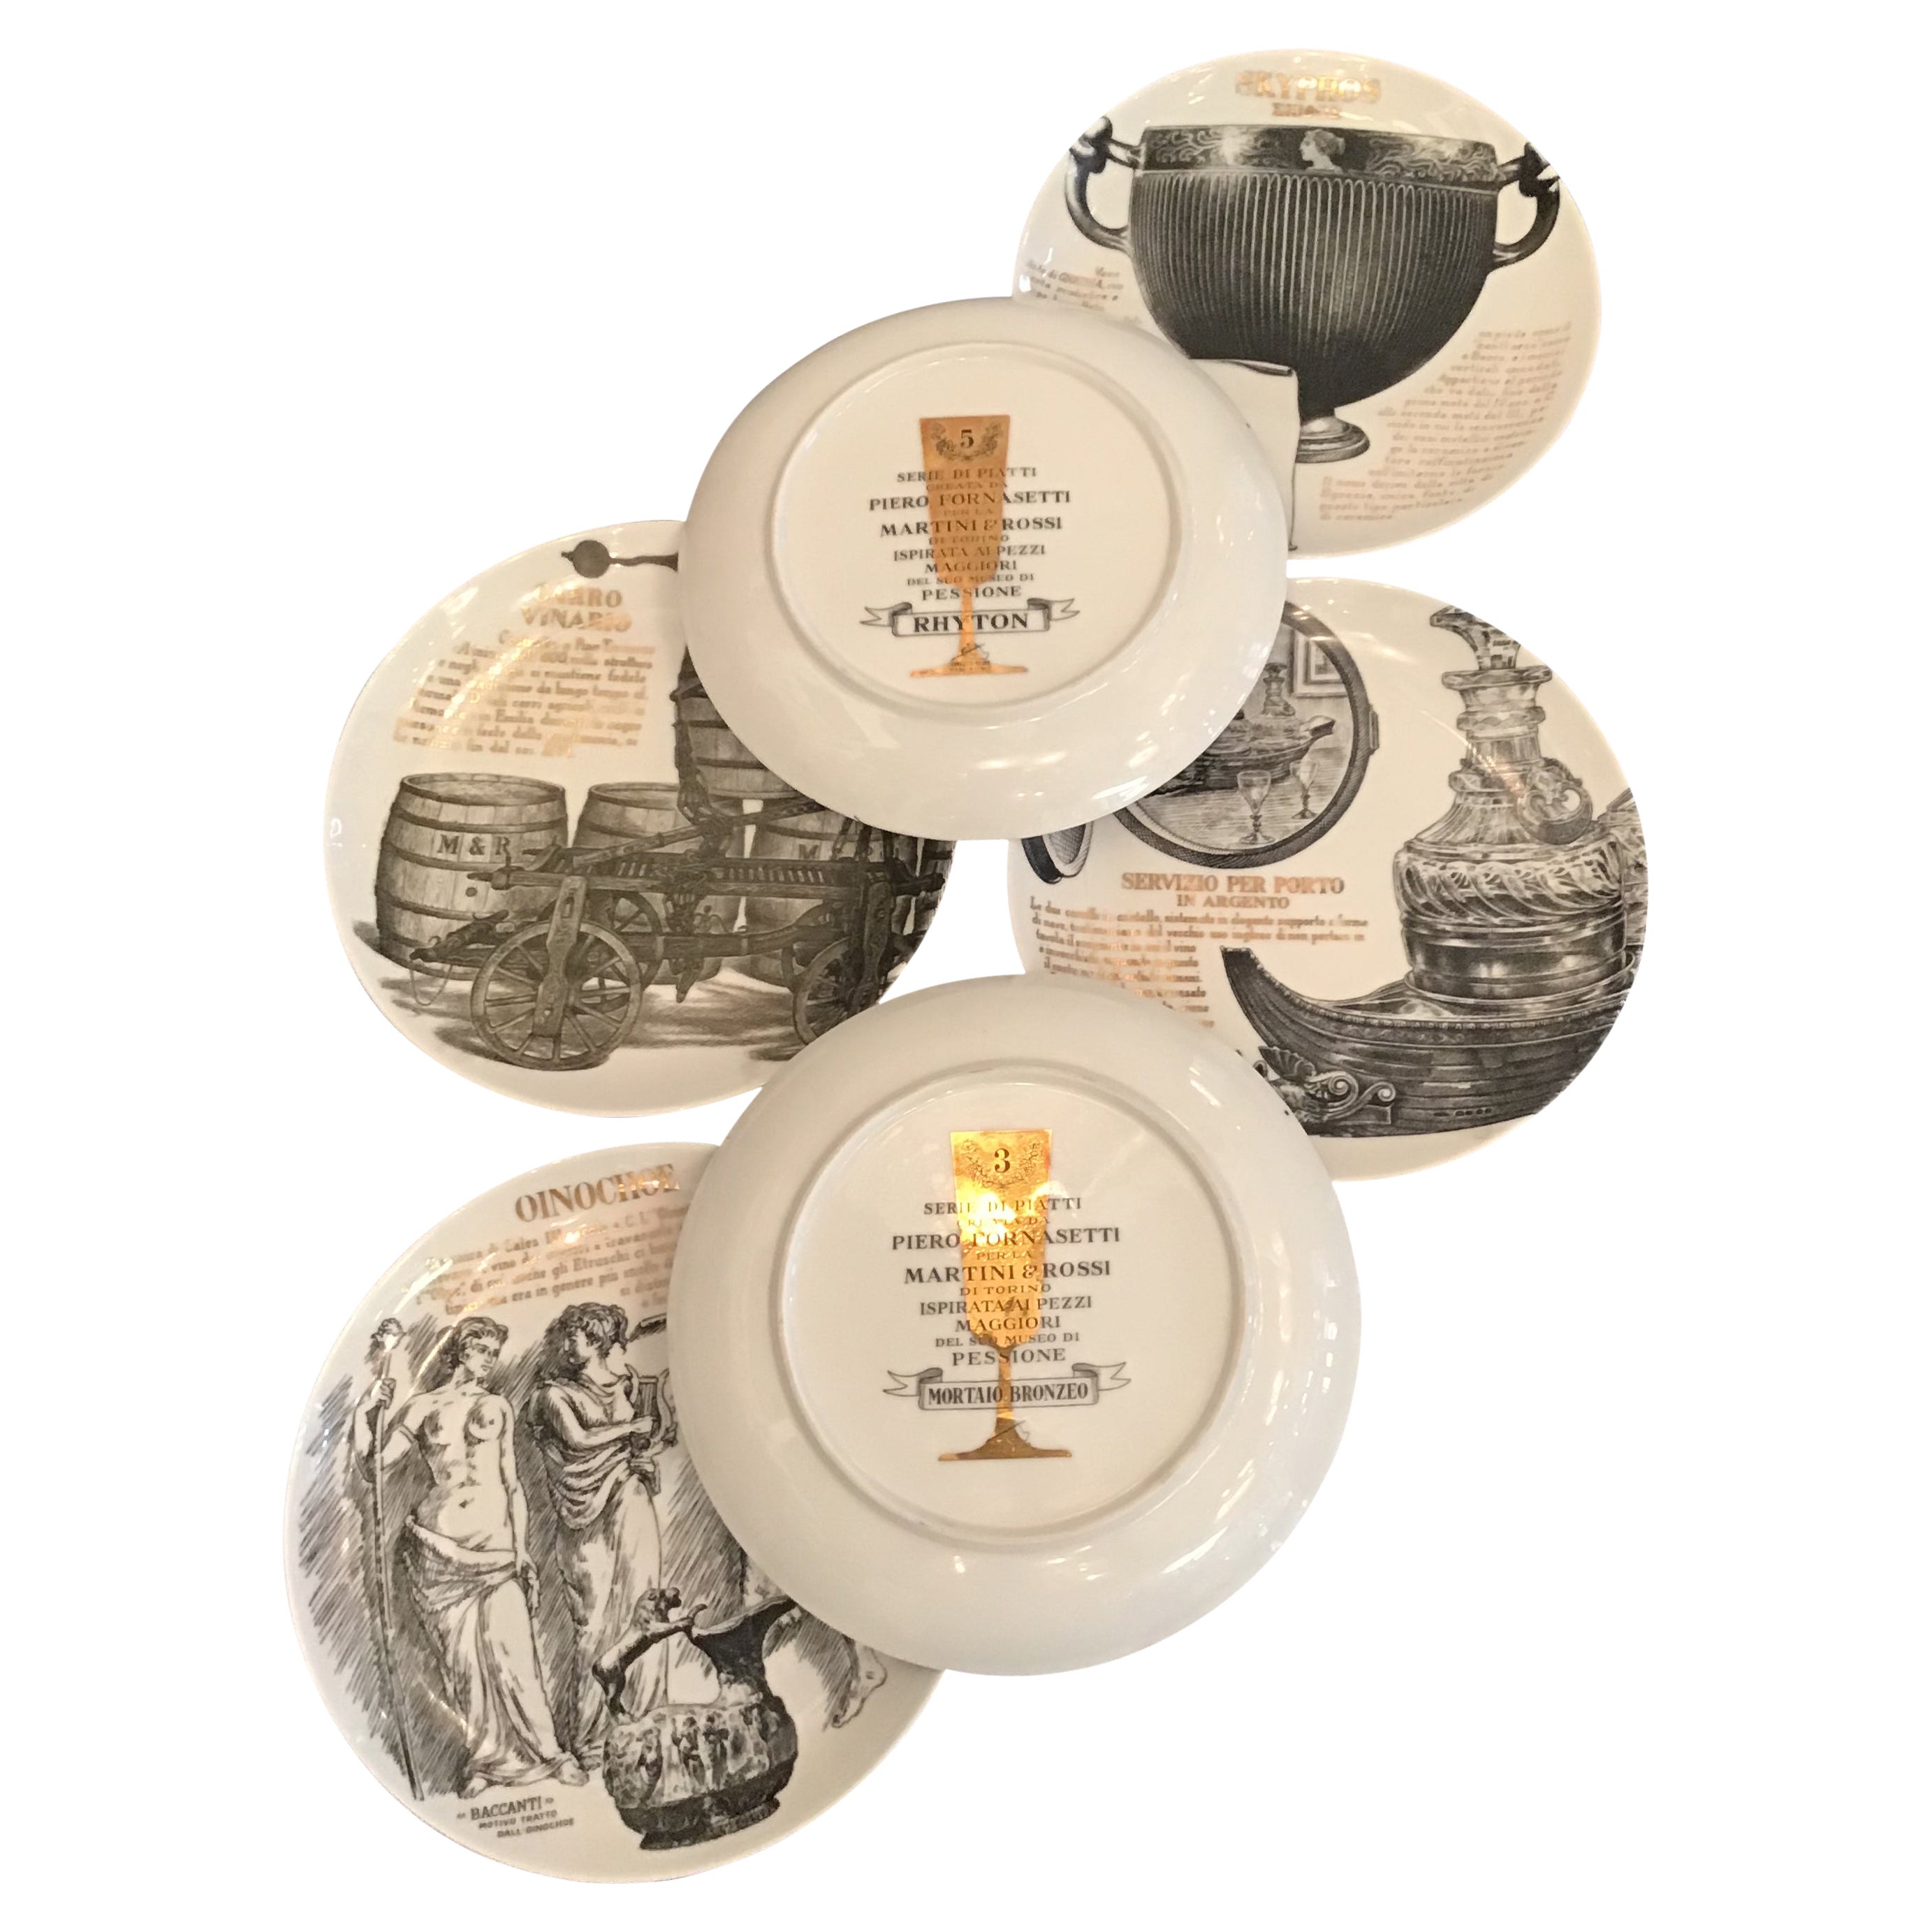 Fornasetti Set of 6 Plates for Martini and Rossi Porcelain, 1970, Italy For Sale